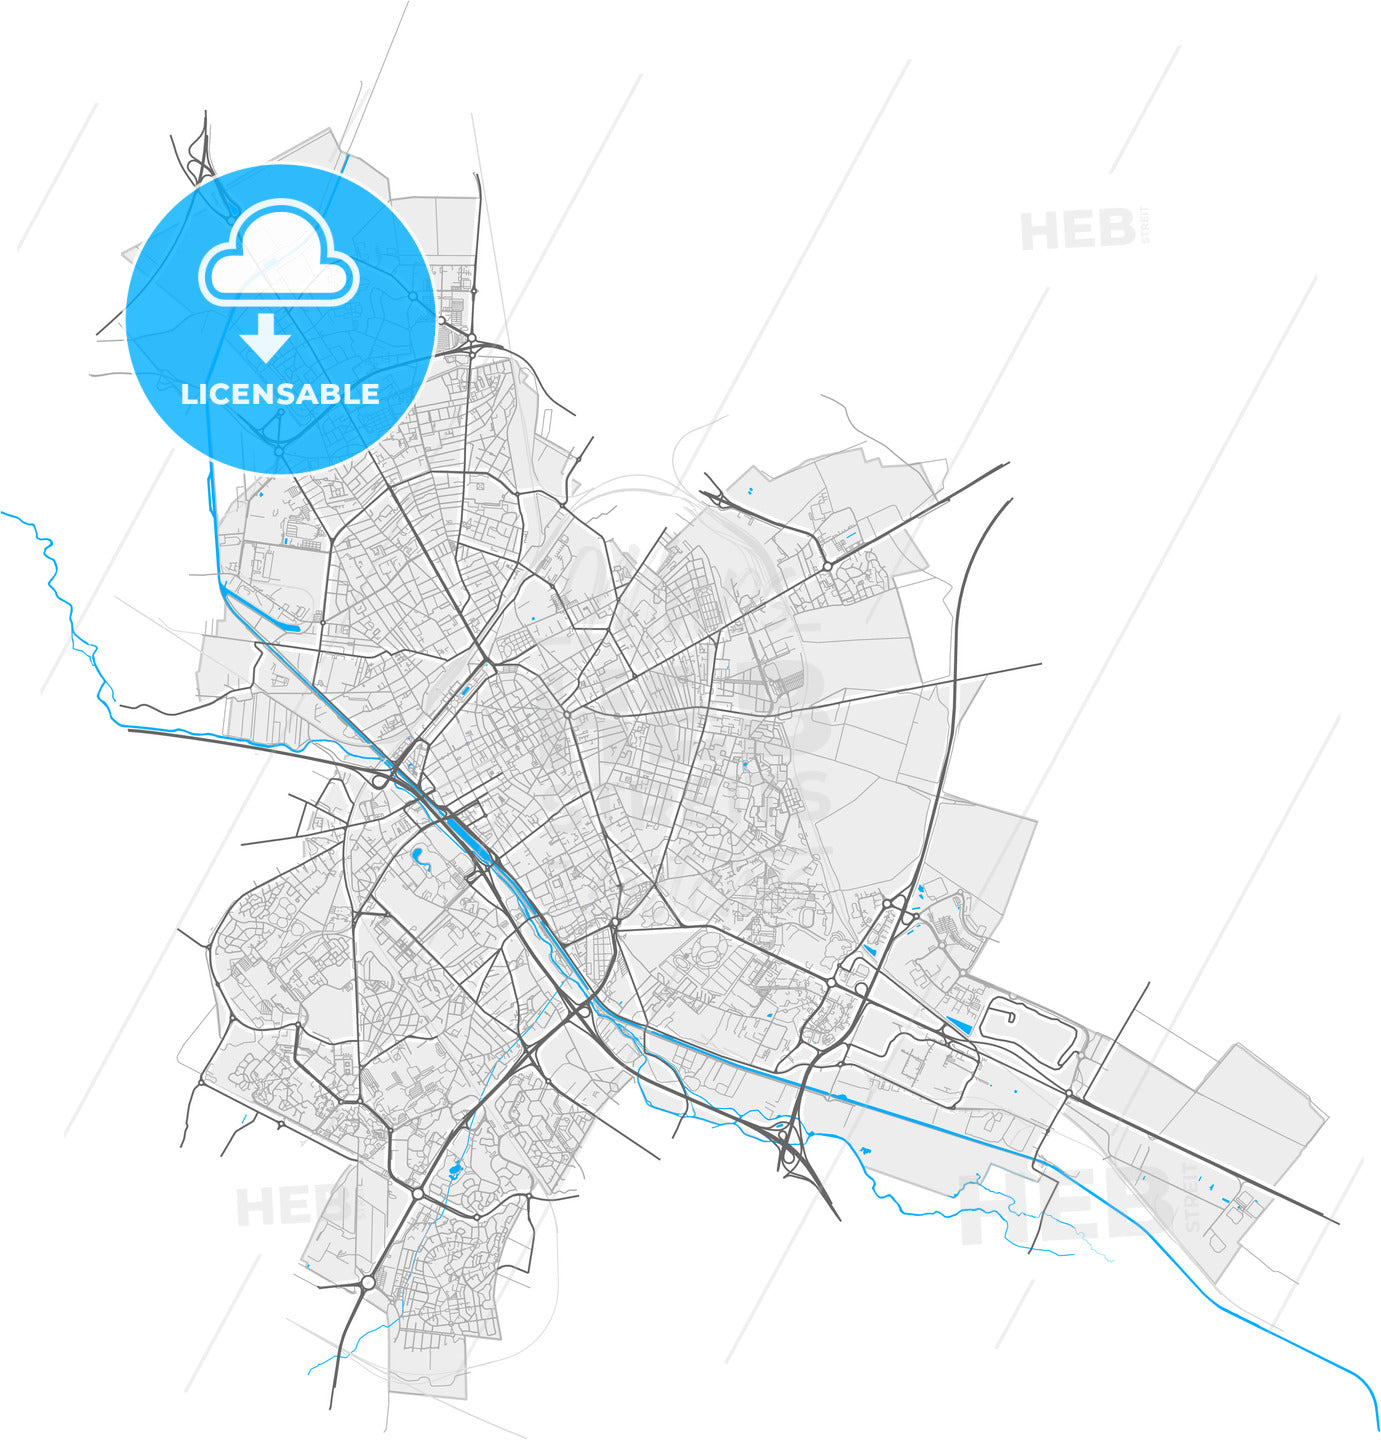 Reims, Marne, France, high quality vector map